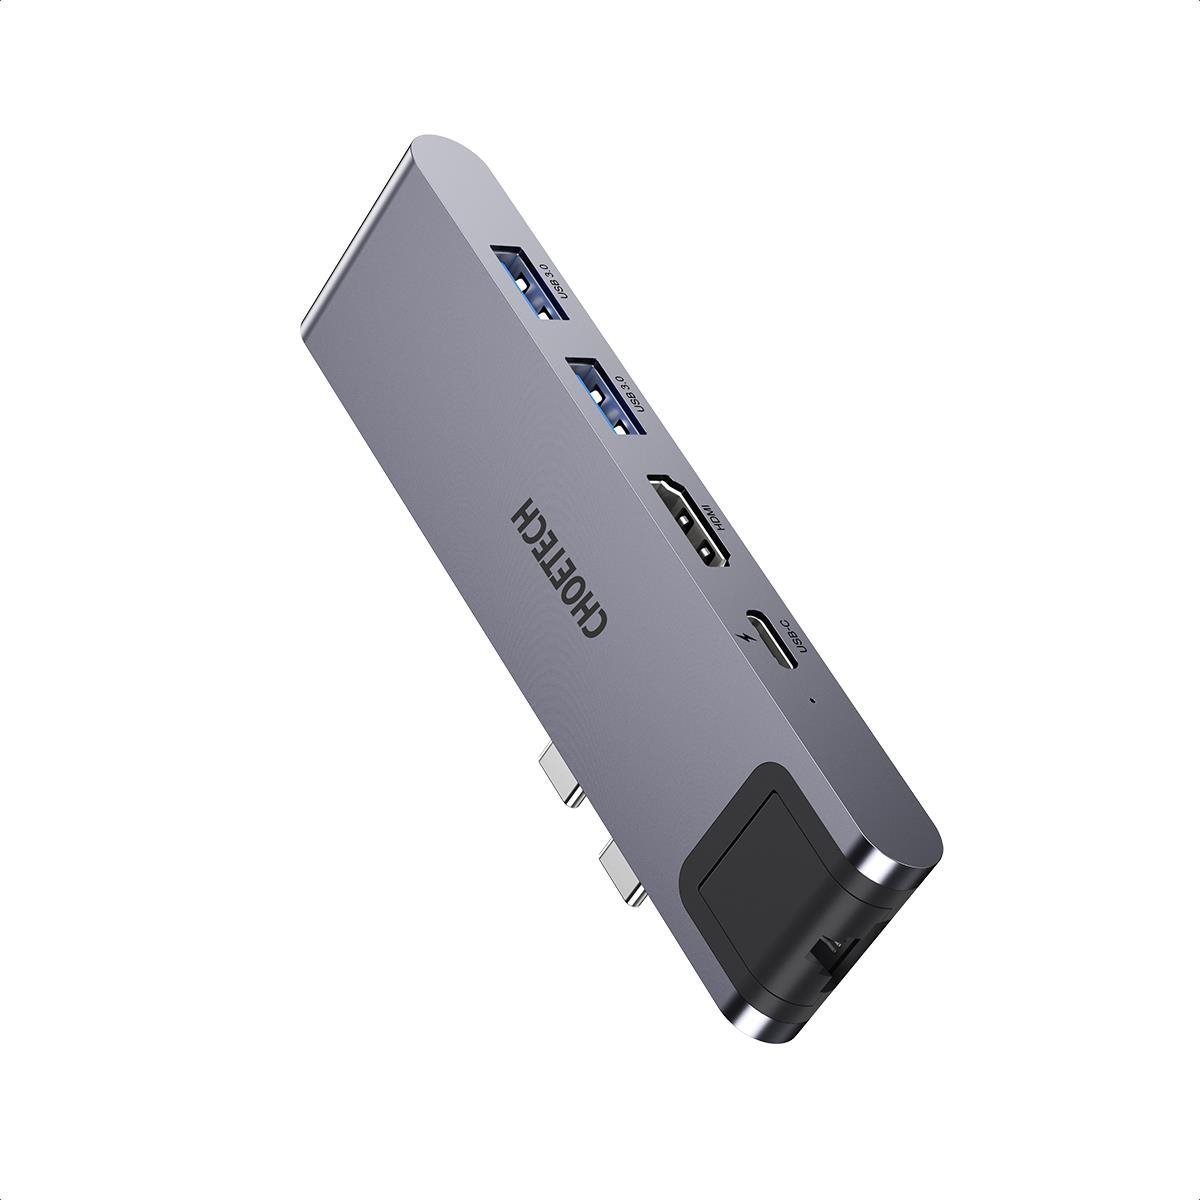 Docking Station Choetech 7-in-1 USB-C Multiport Adapter Lateral view